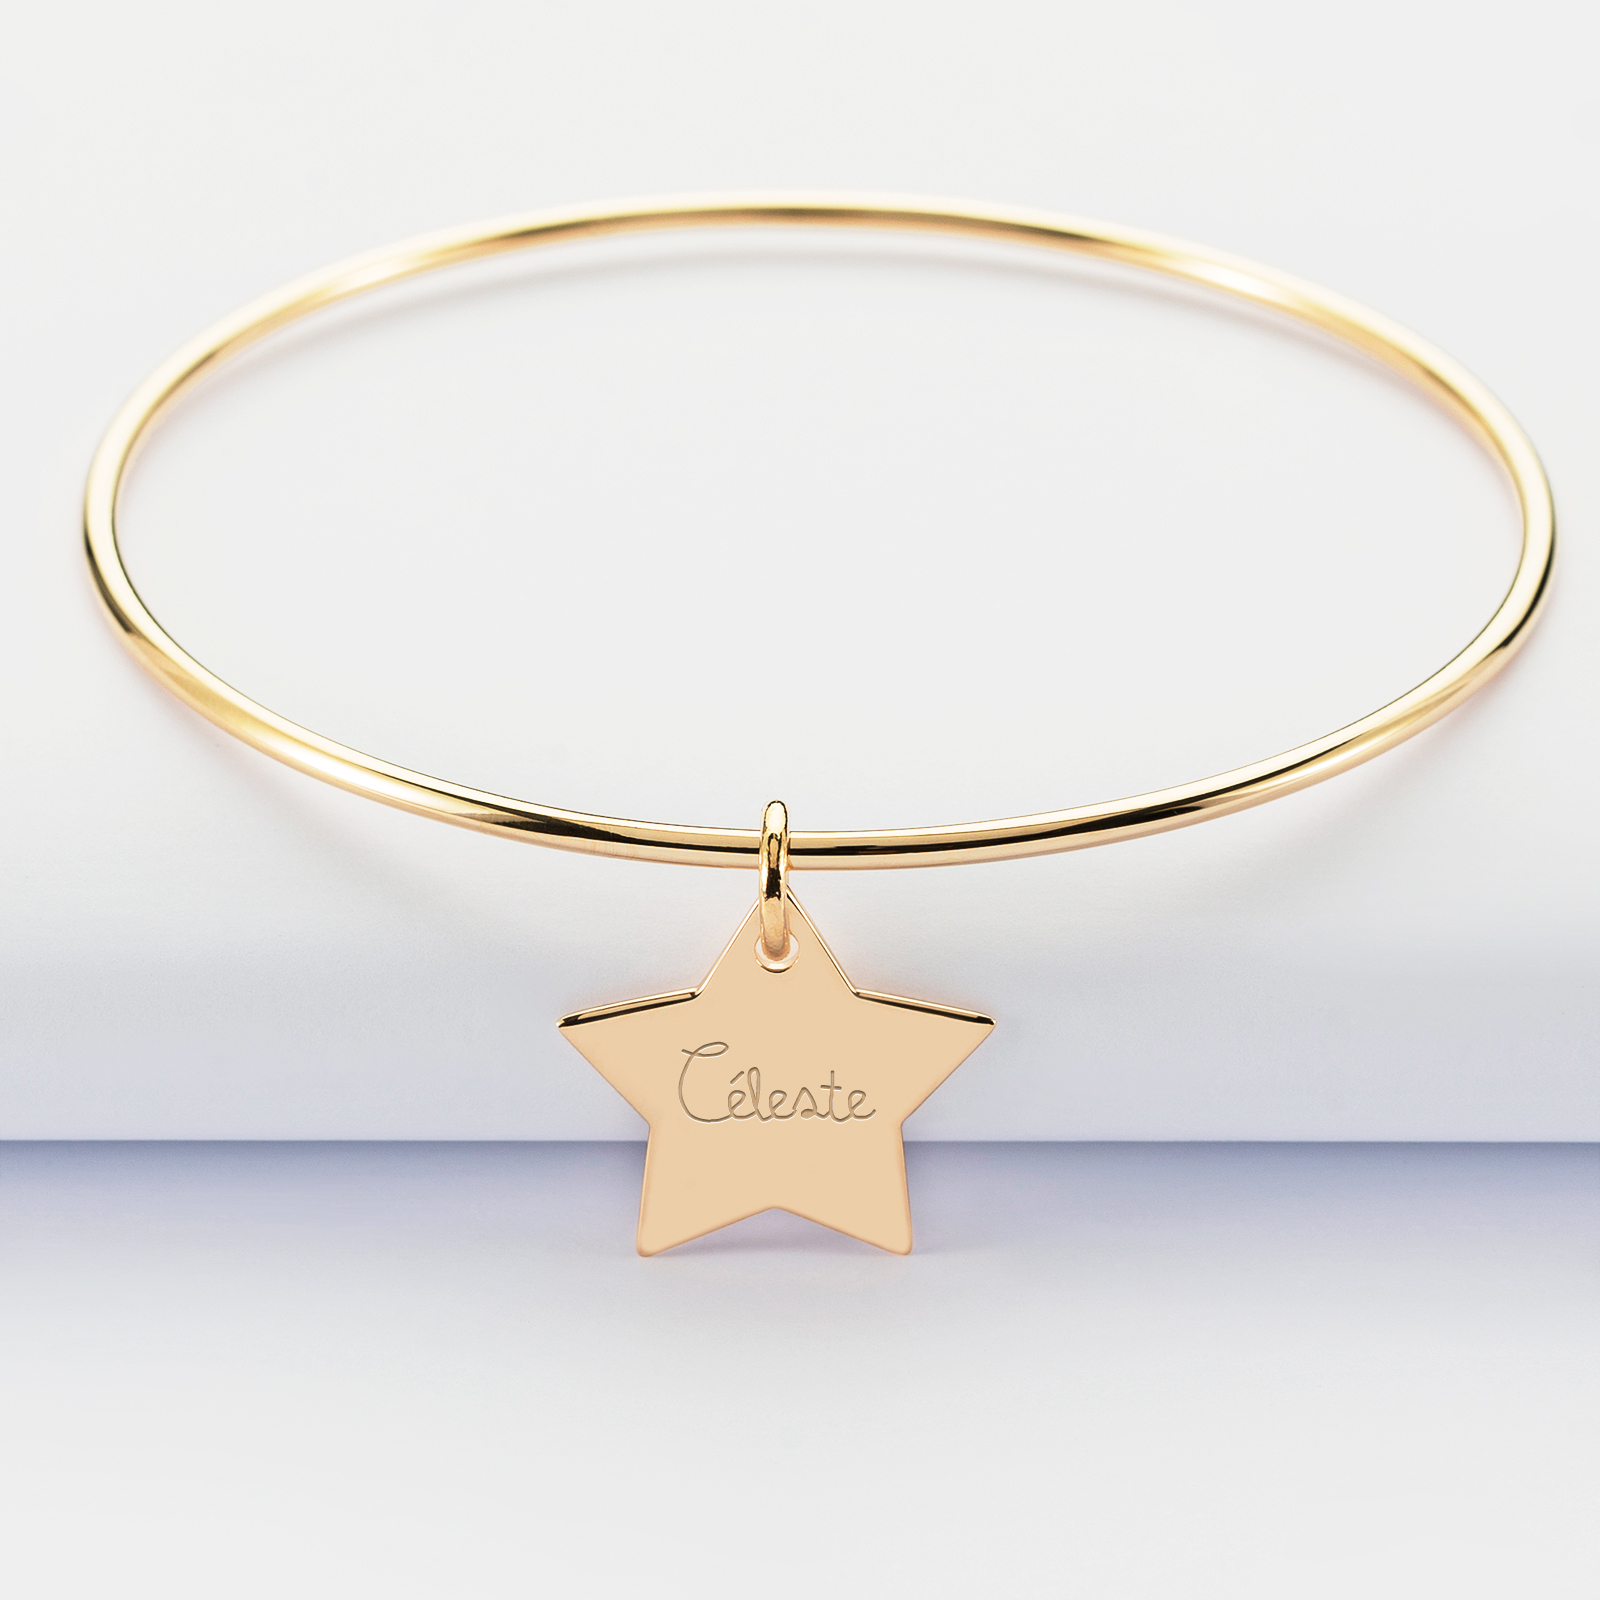 Personalised gold plated bangle and engraved star medallion 20x20mm - name